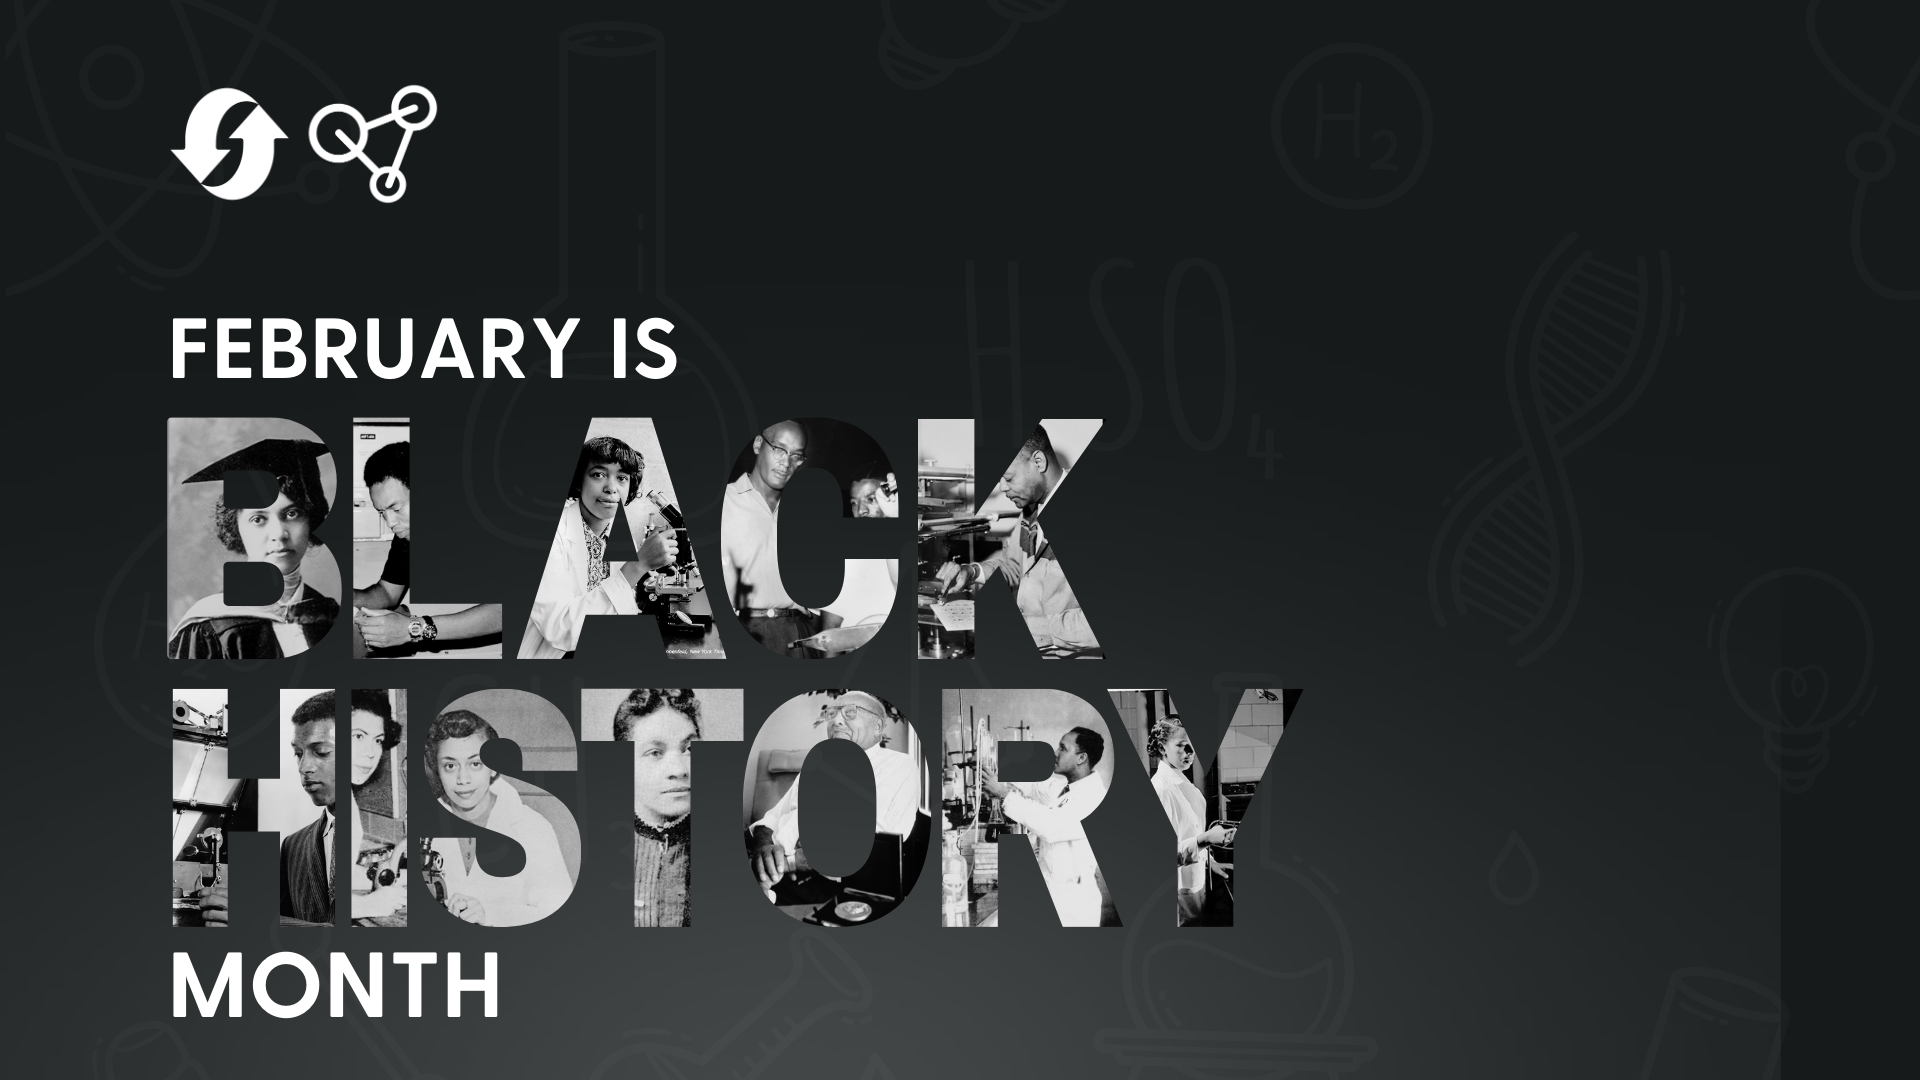 Join us this February as we celebrate Black History Month by recognizing 12 incredible scientists and their contributions!